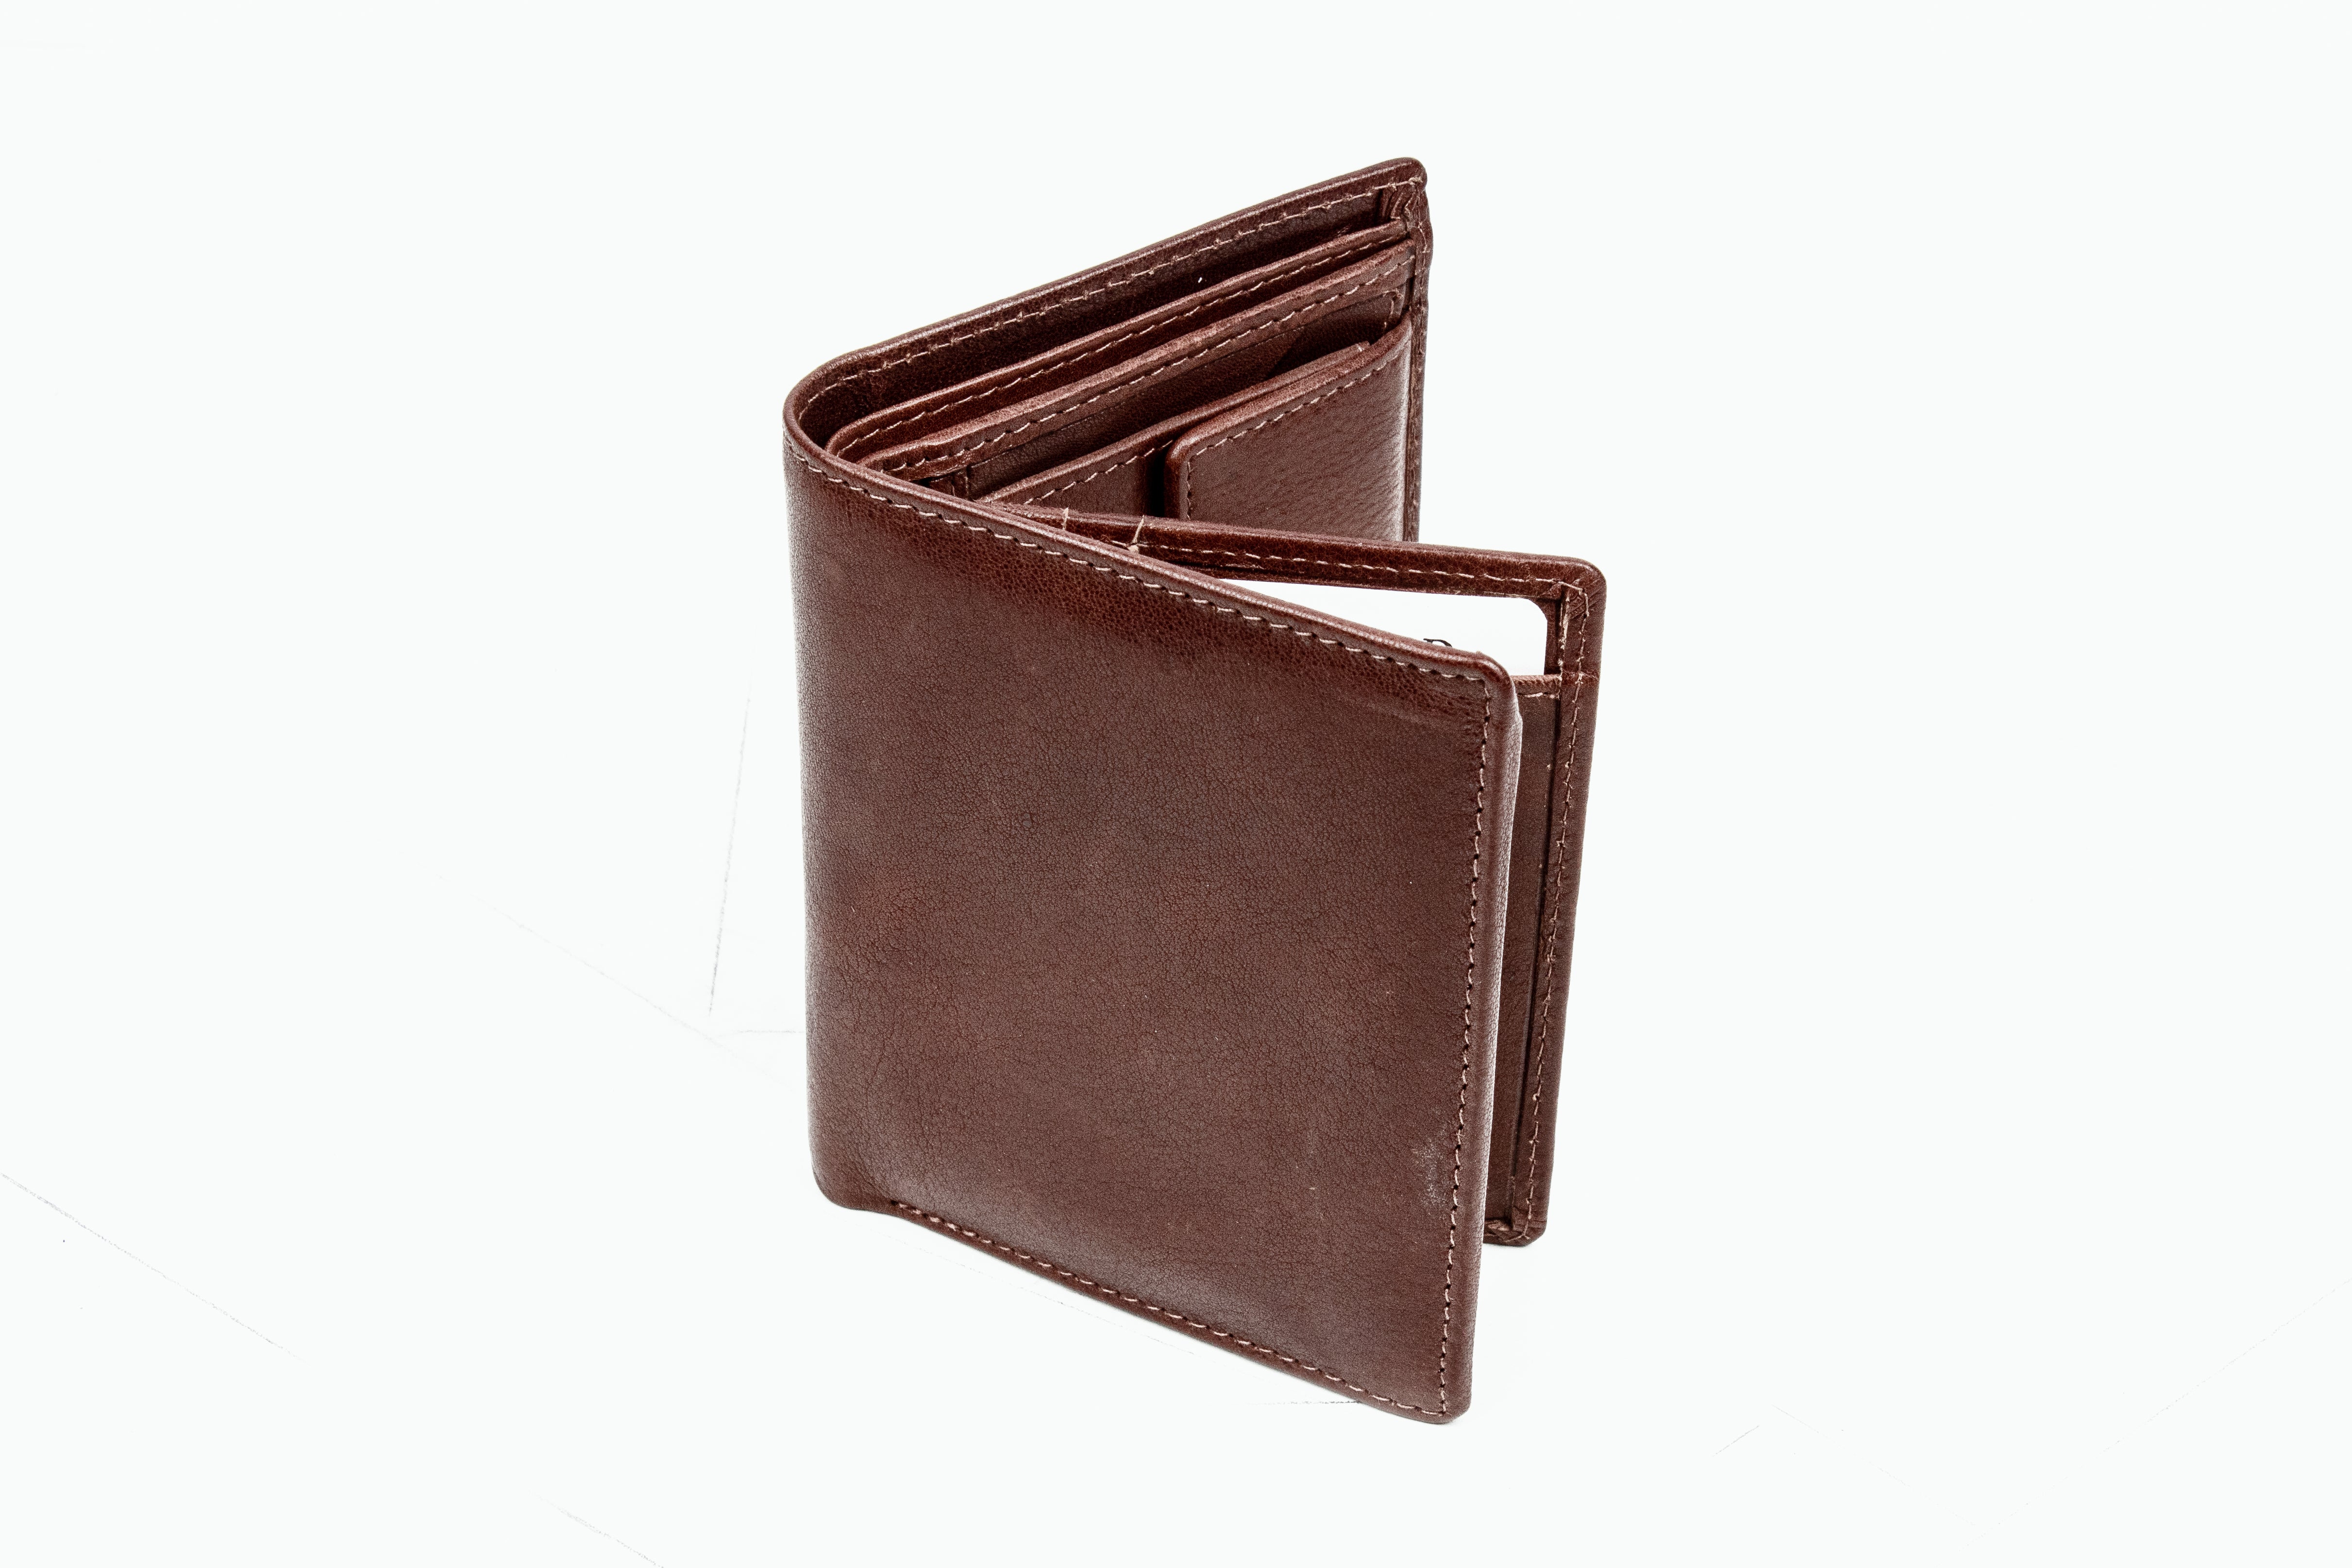 Leather Money Carrying Bag (BROWN) 13414 – Sreeleathers Ltd